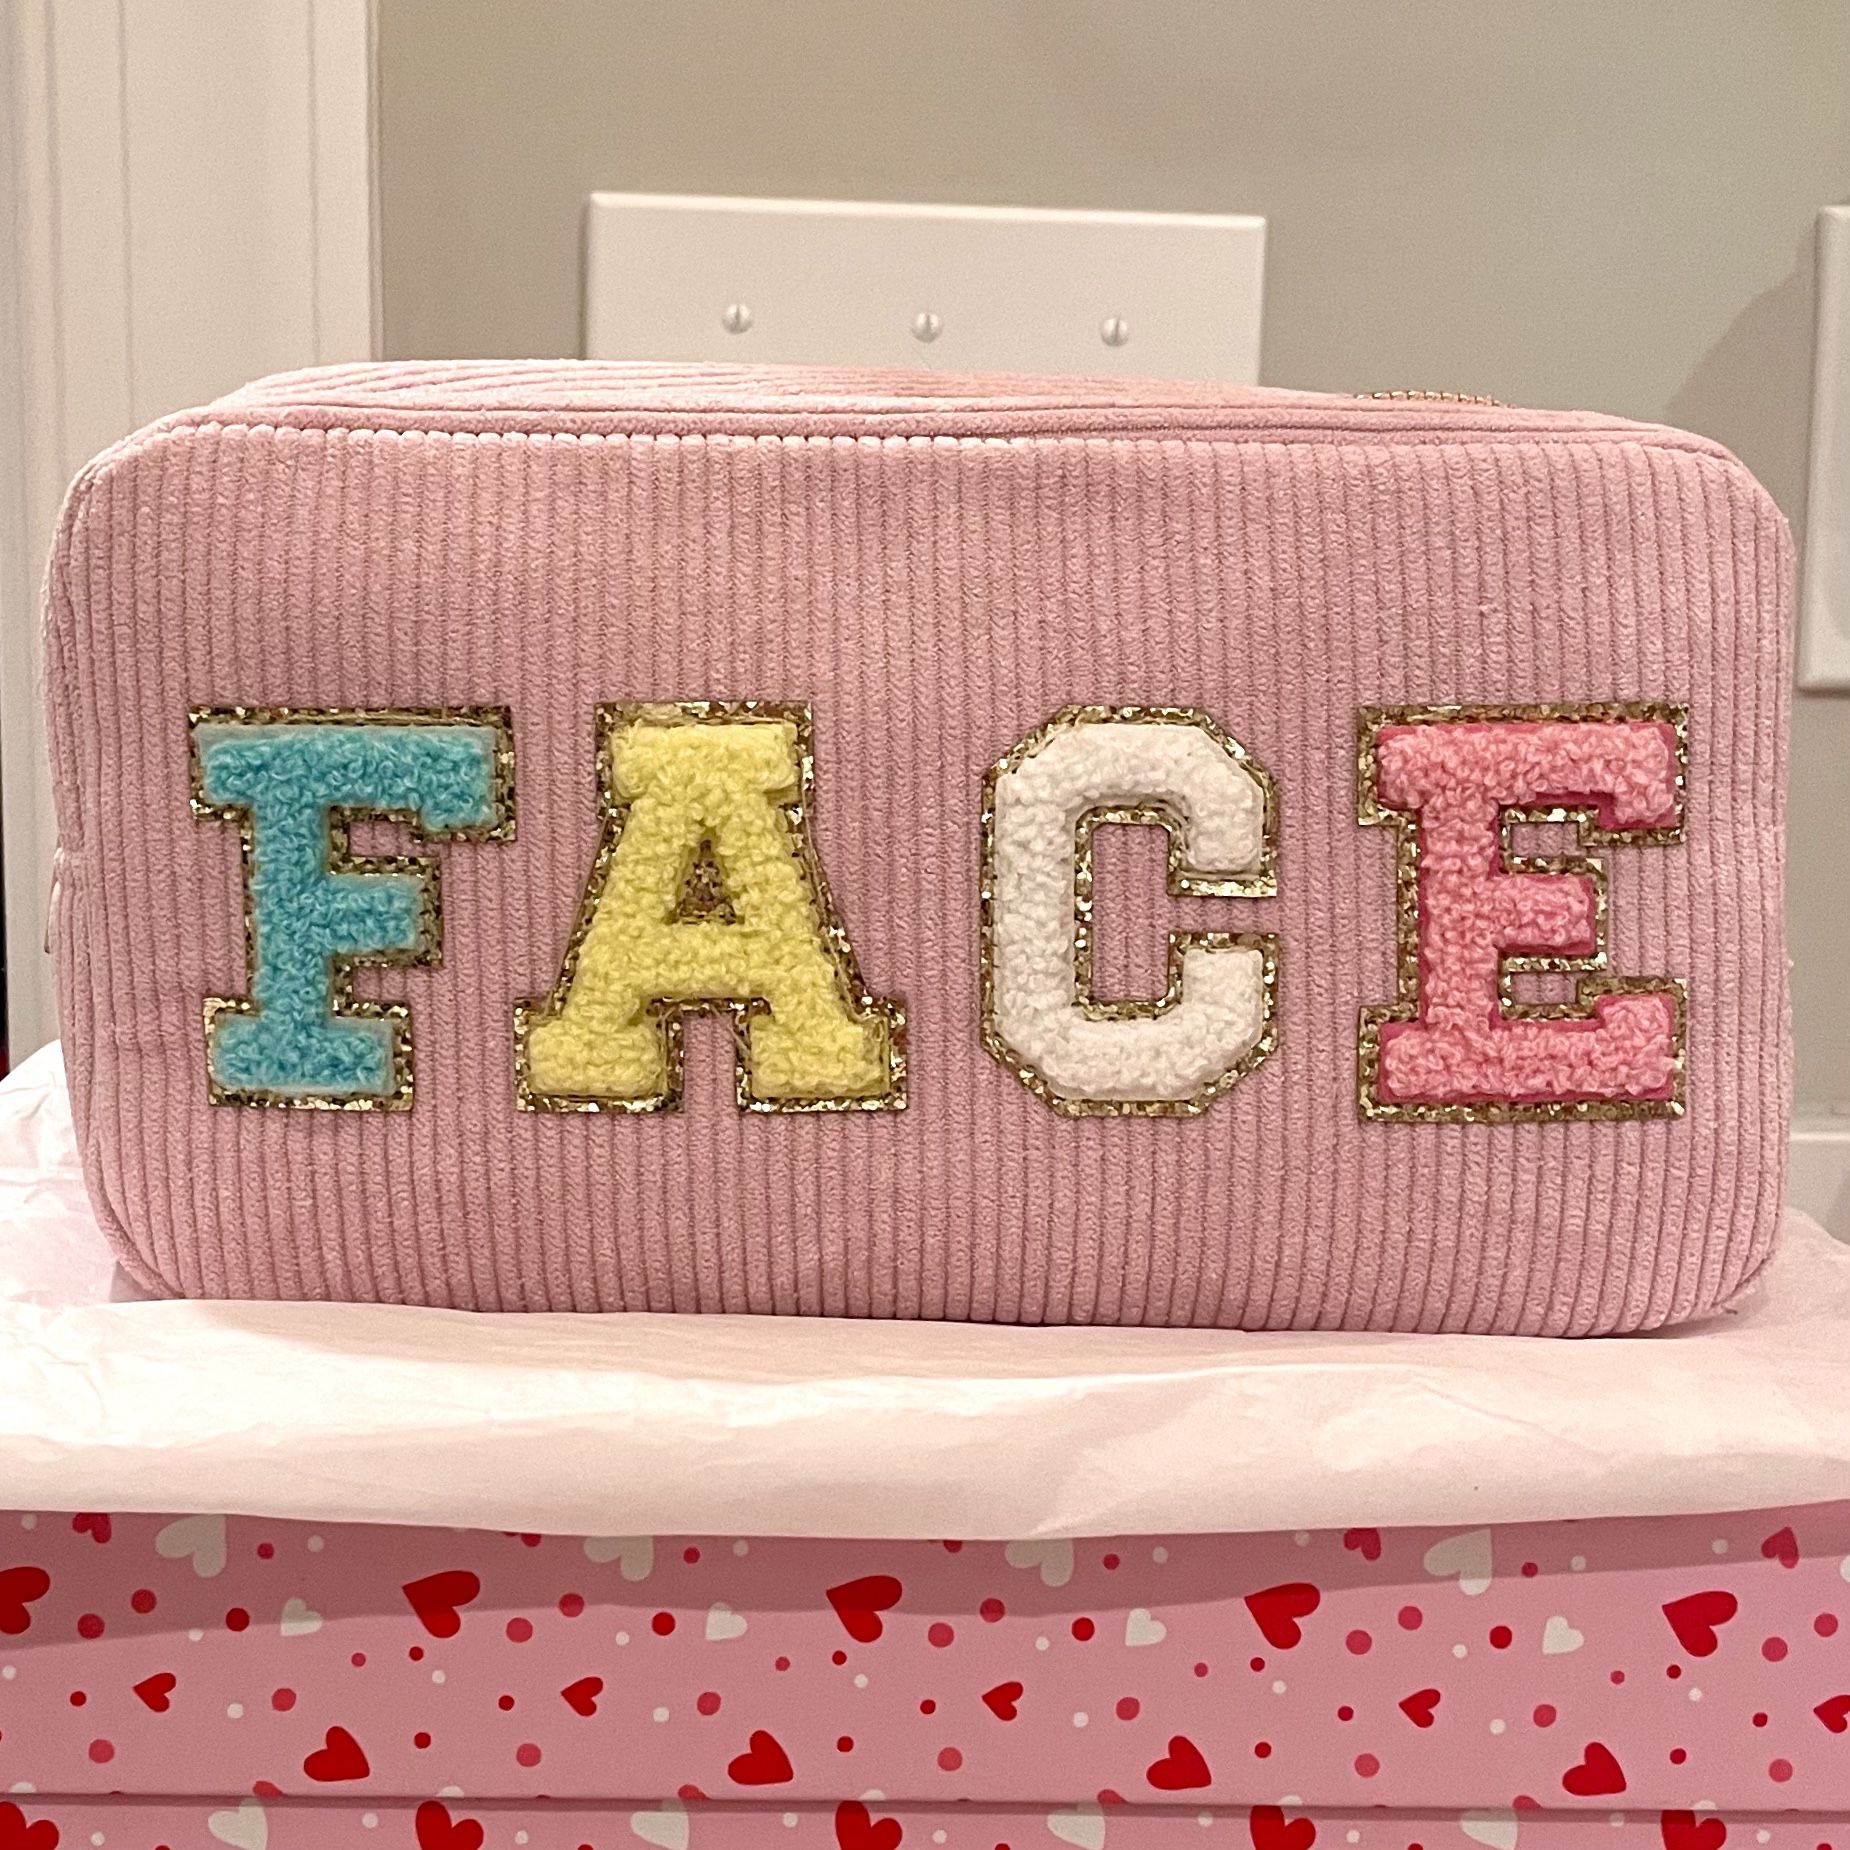 NWOT Chenille Patch Letters FACE Corduroy Makeup Bag in Pink